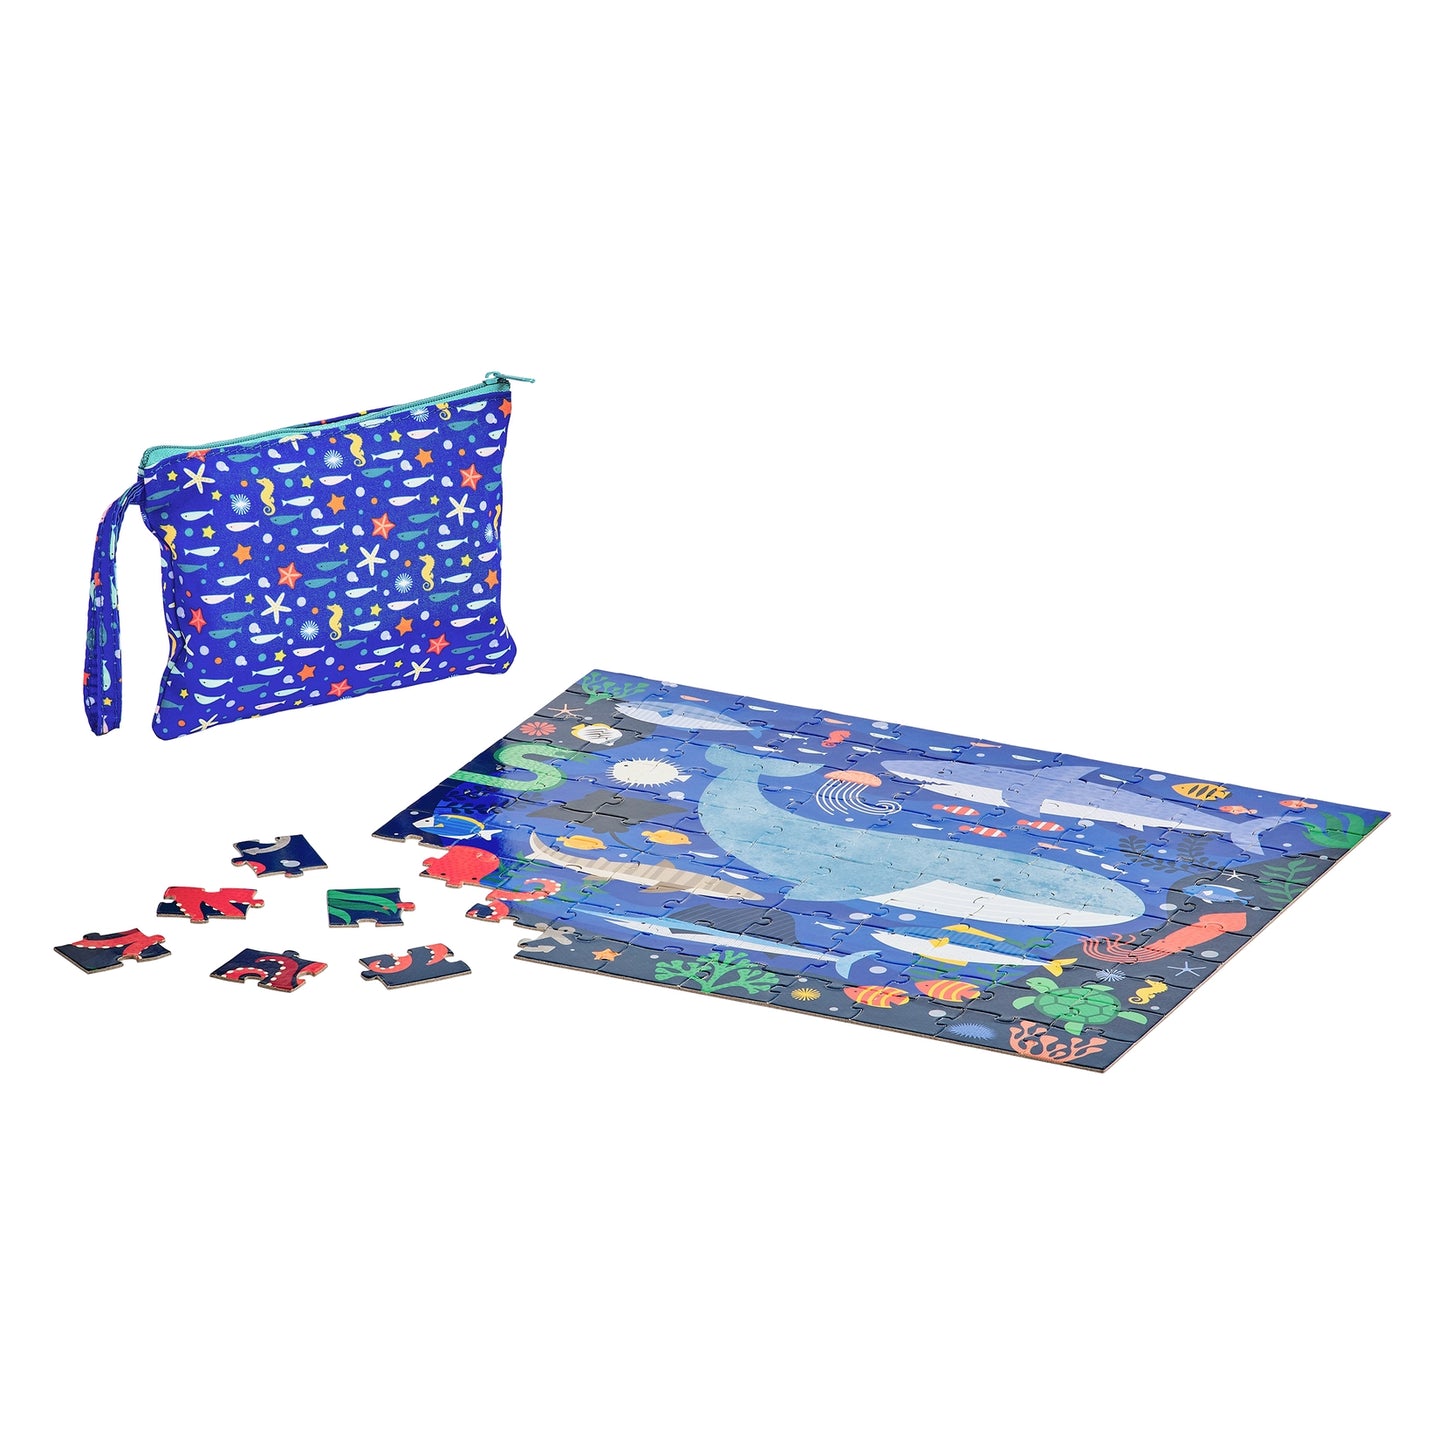 Two Sided Under the Sea On-The-Go Puzzle